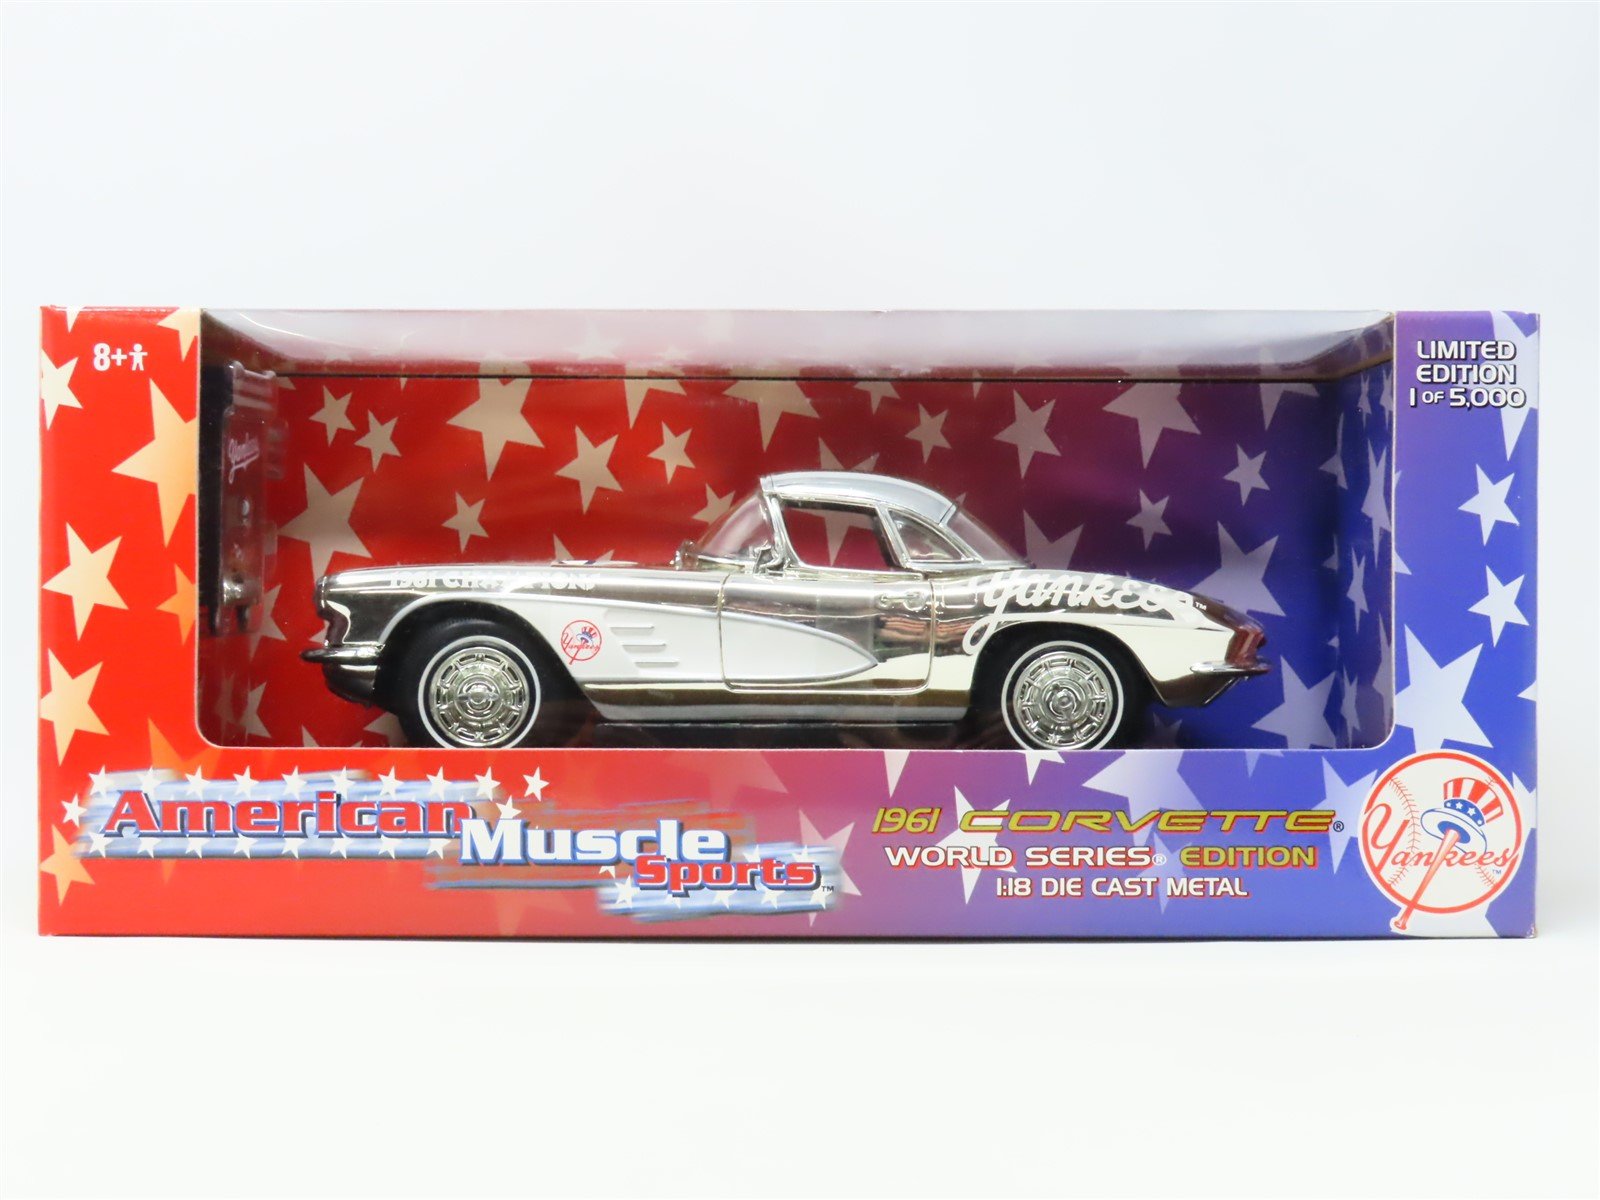 1:18 RC2 American Muscle Sports 33457 1961 Corvette Yankees World Series Edition